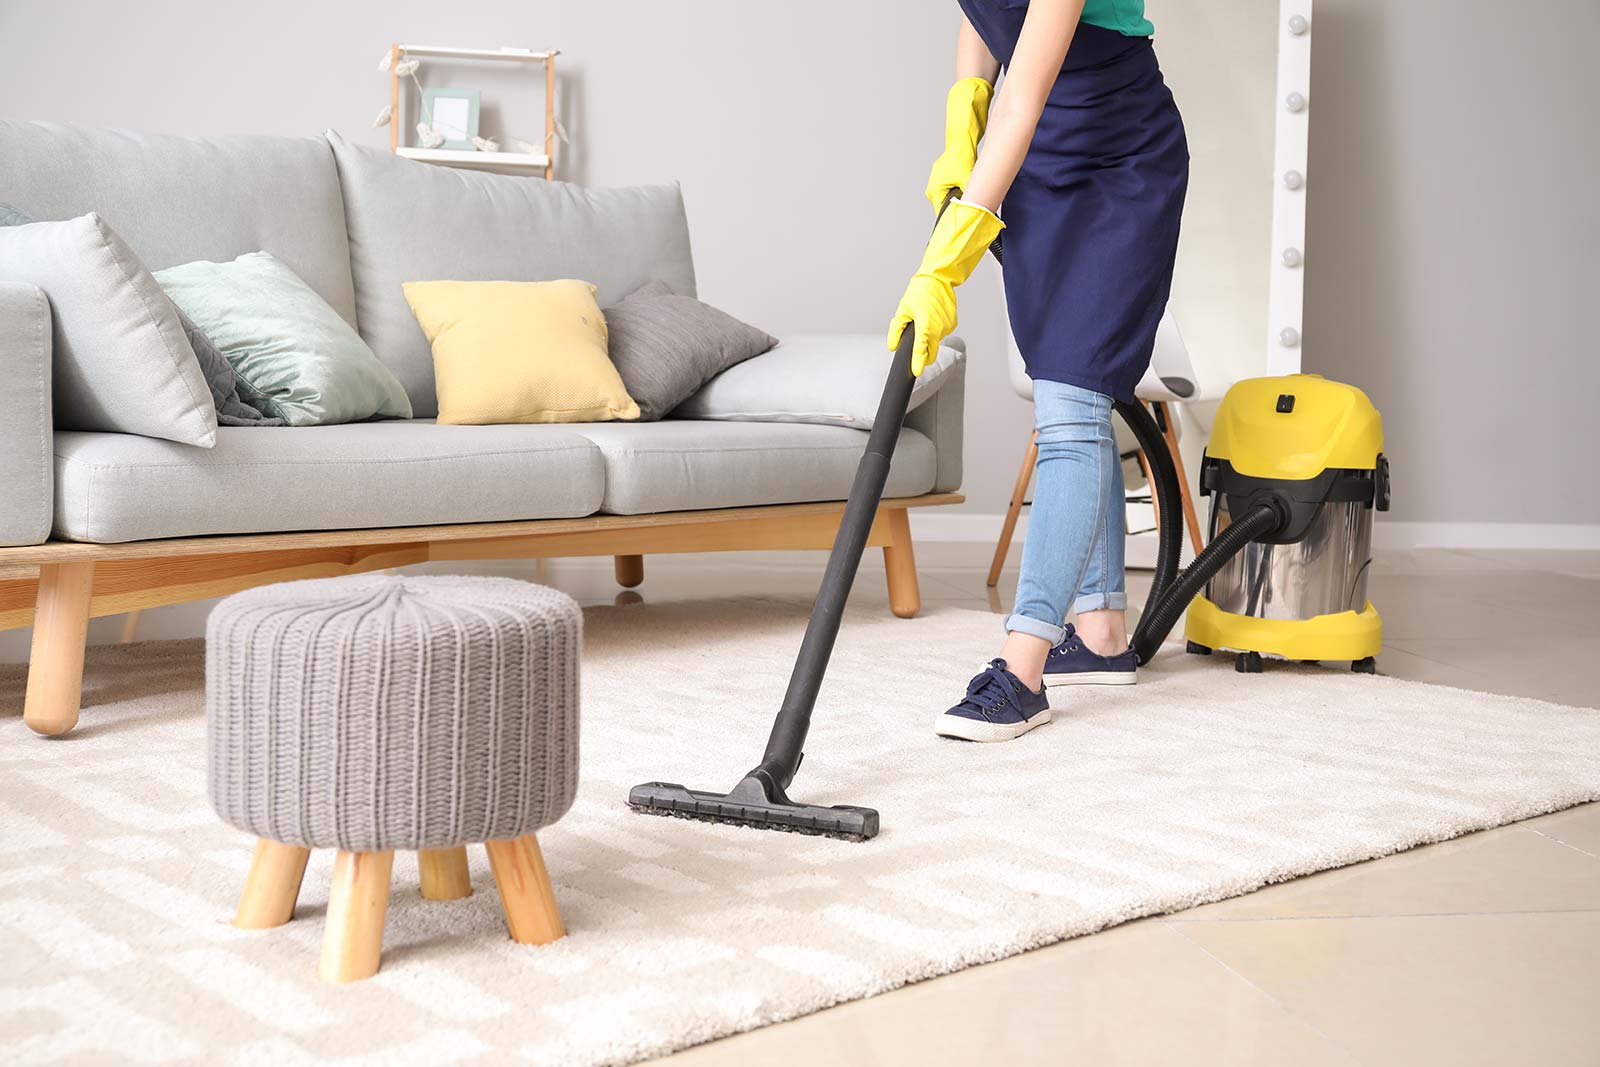 Top 50 House Cleaning Websites for 2020 | FreshySites